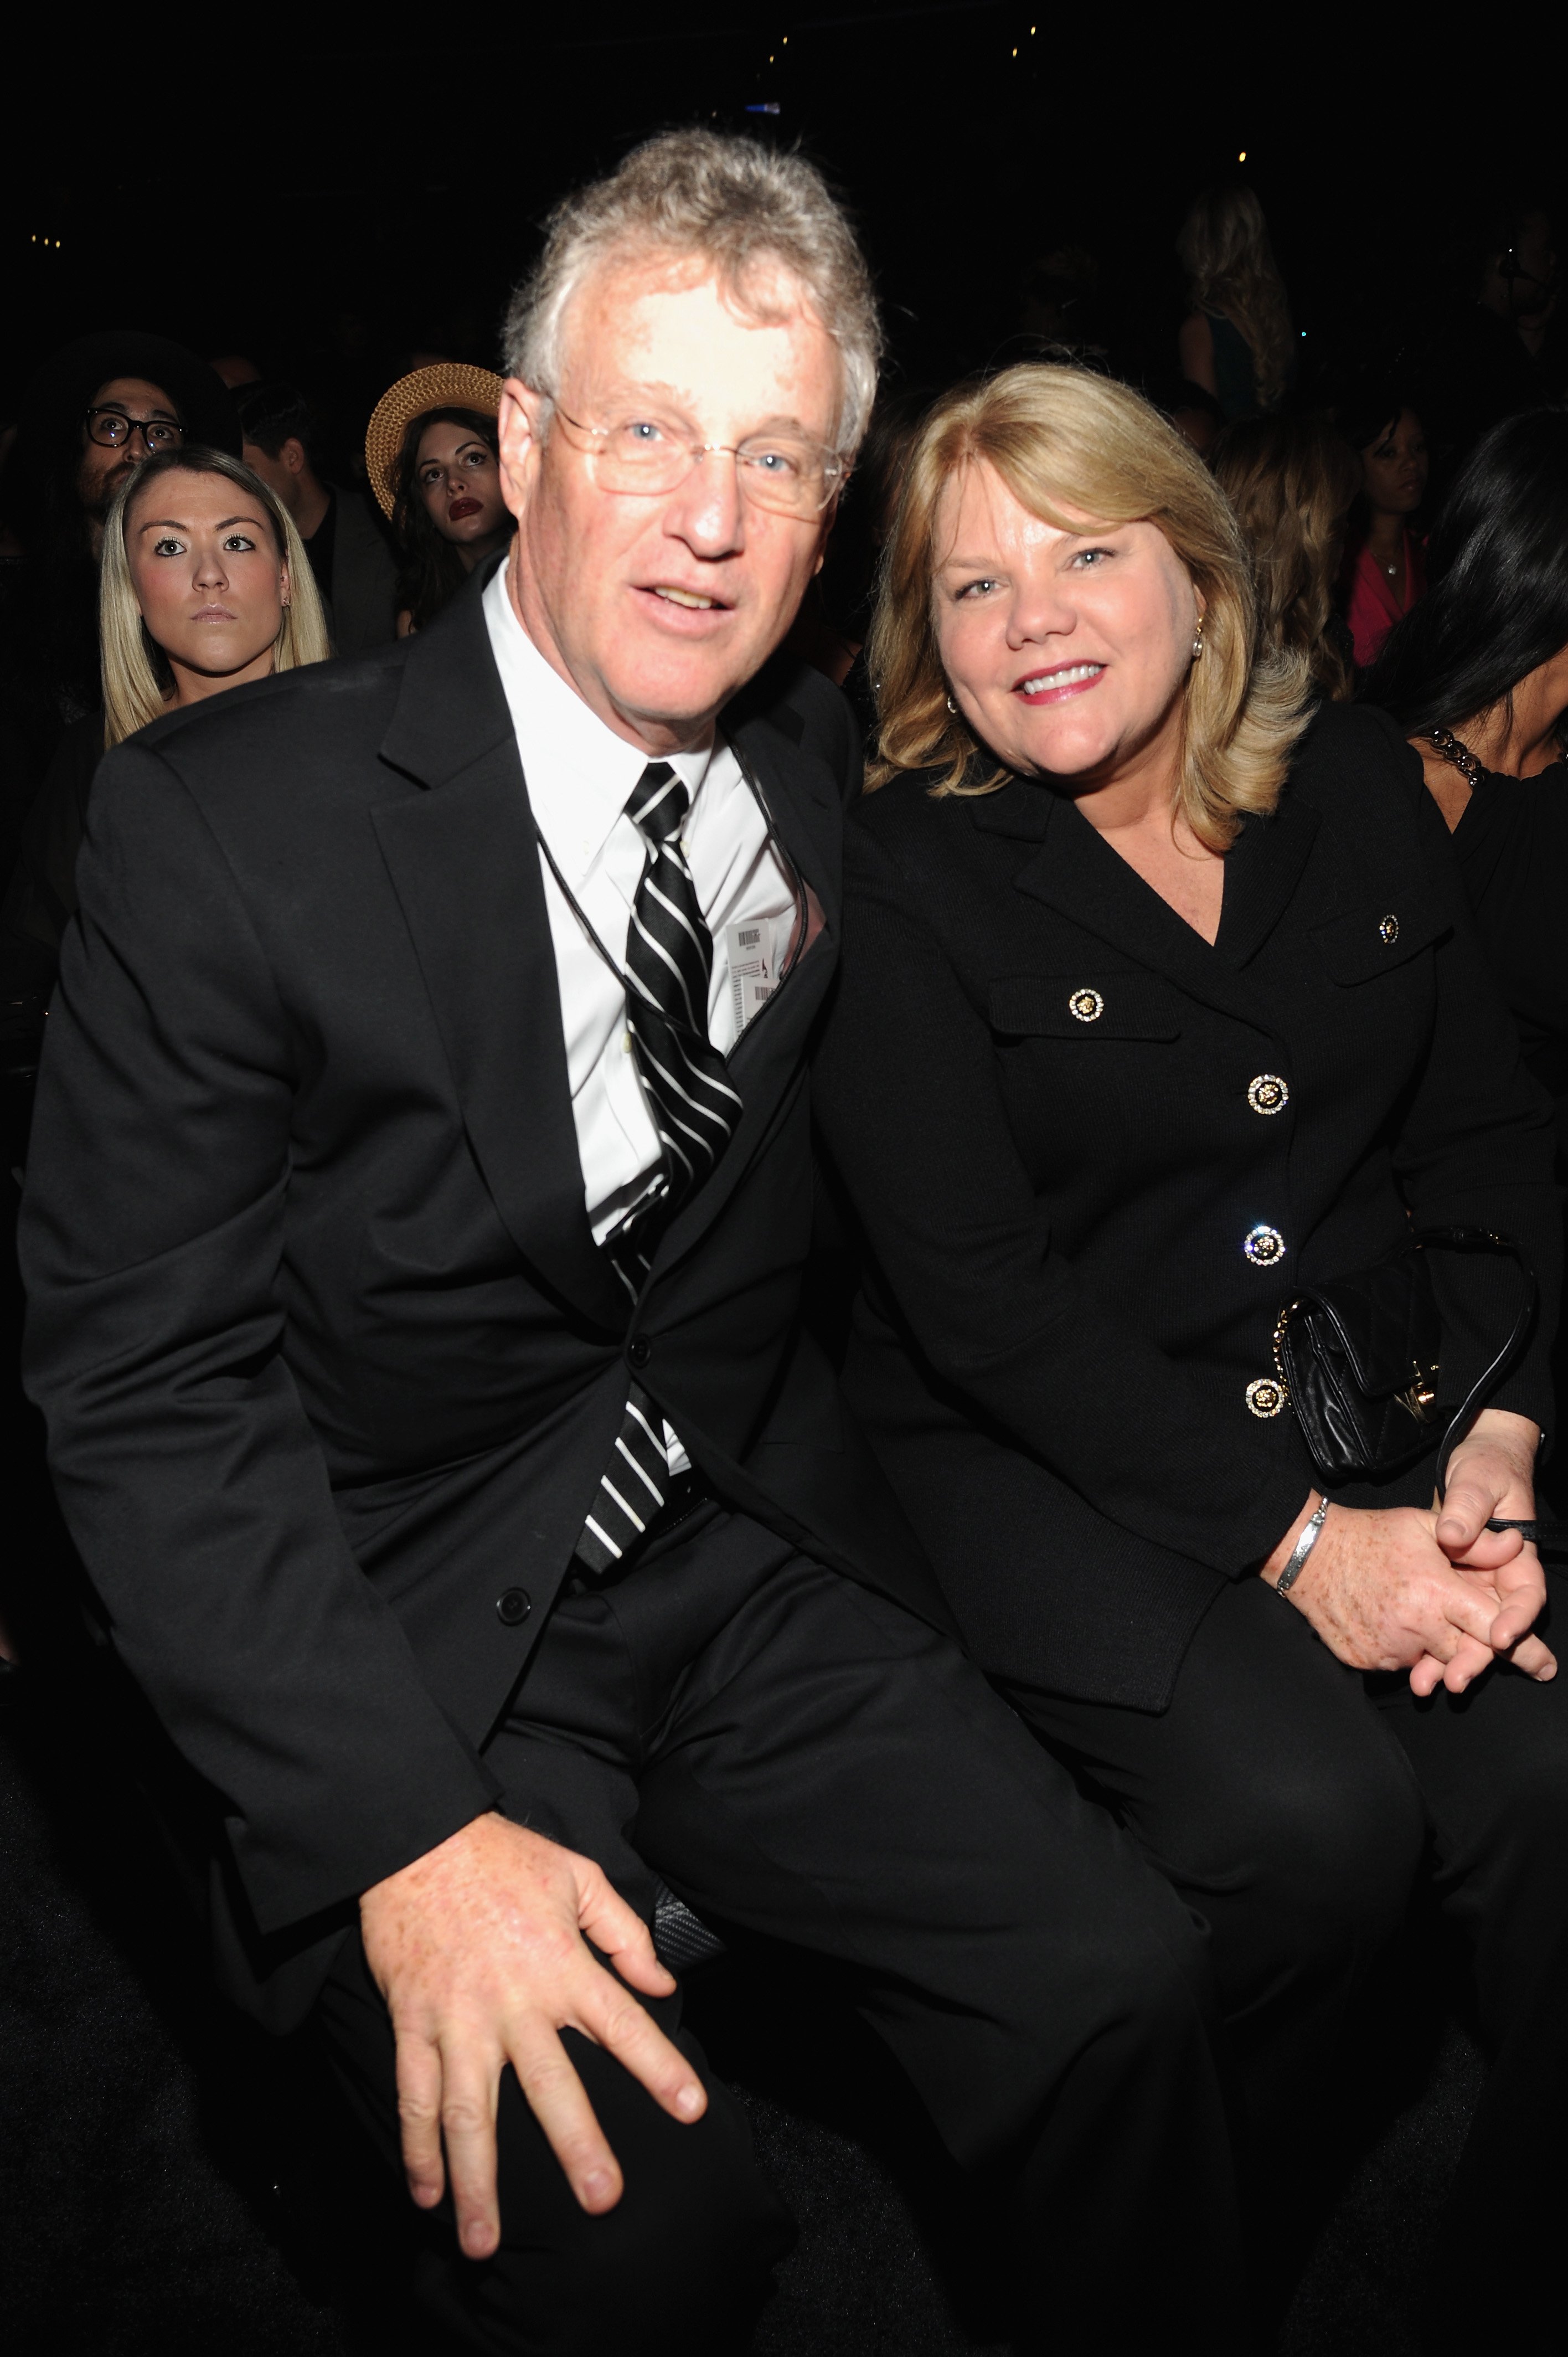 Scott Swift and Andrea Swift at the 56th GRAMMY Awards on January 26, 2014 in California | Source: Getty Images 